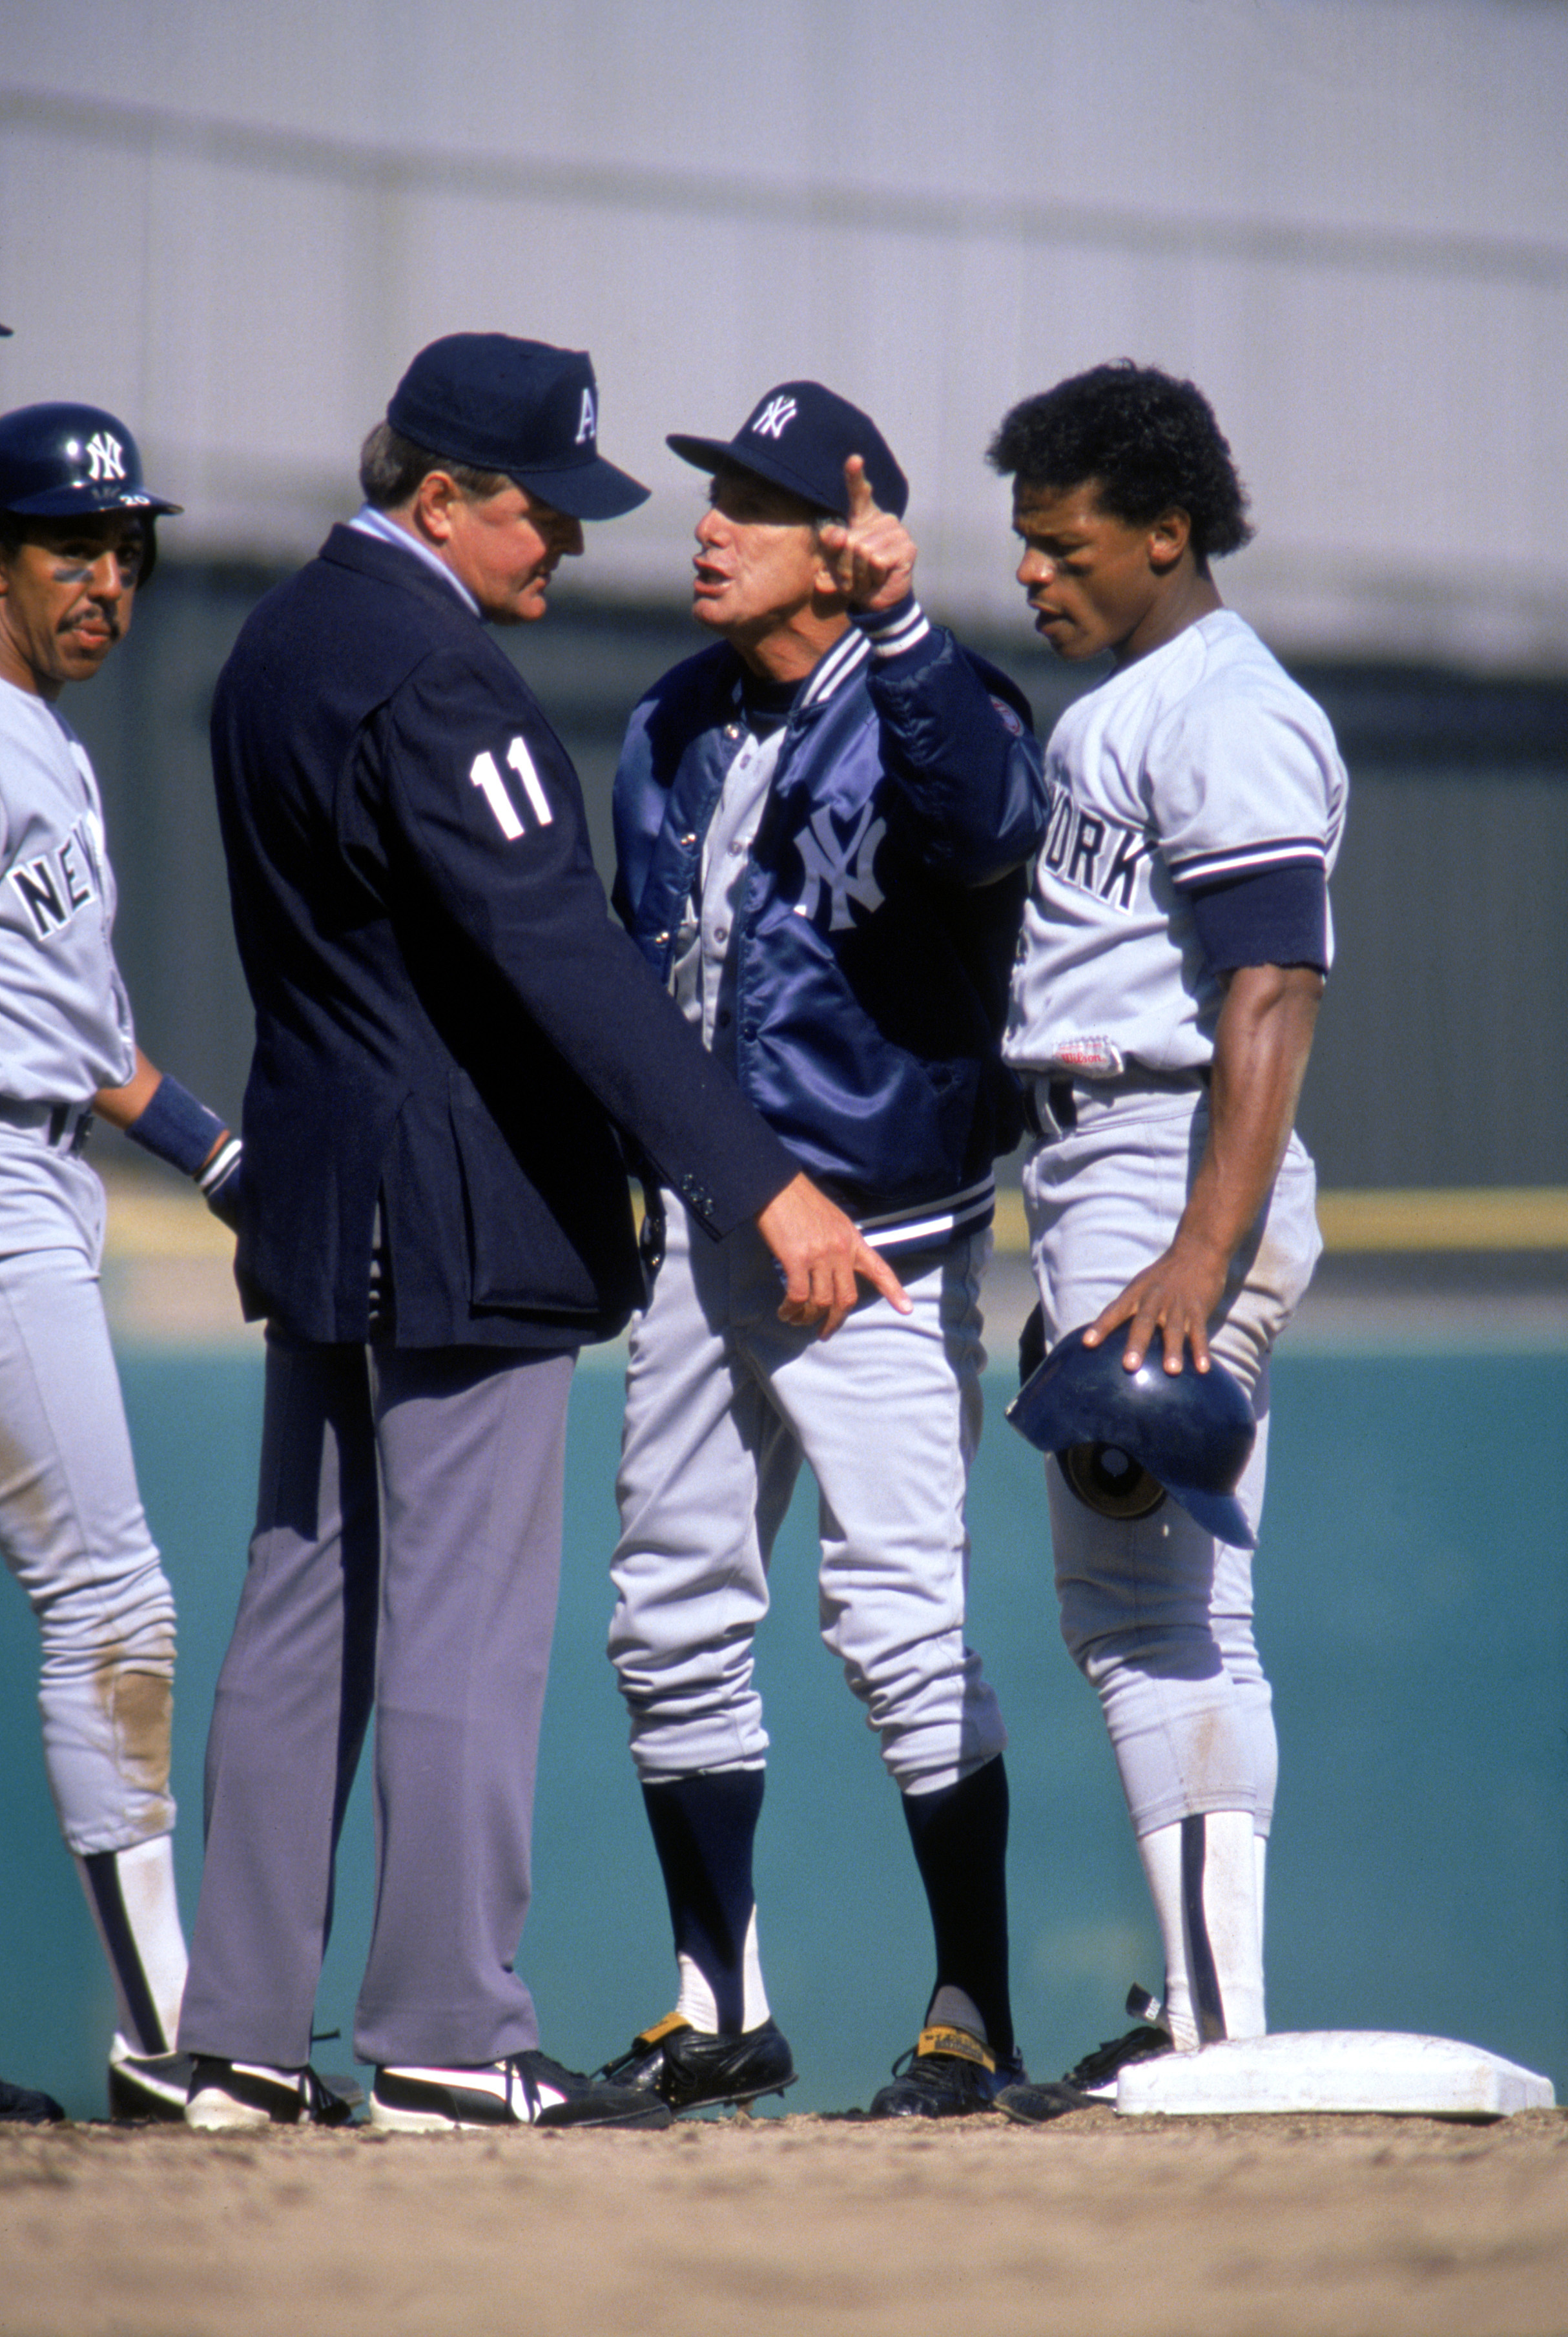 BRONX, NEW YORK - APRIL 7:  Manager Billy Martin of the New York Yankees argues with an umpire as outfielder Rickey Henderson #24 watches during the game on April 7, 1988 at Yankee Stadium in Bronx, New York. (Photo by Jonathan Daniel/Getty Images)